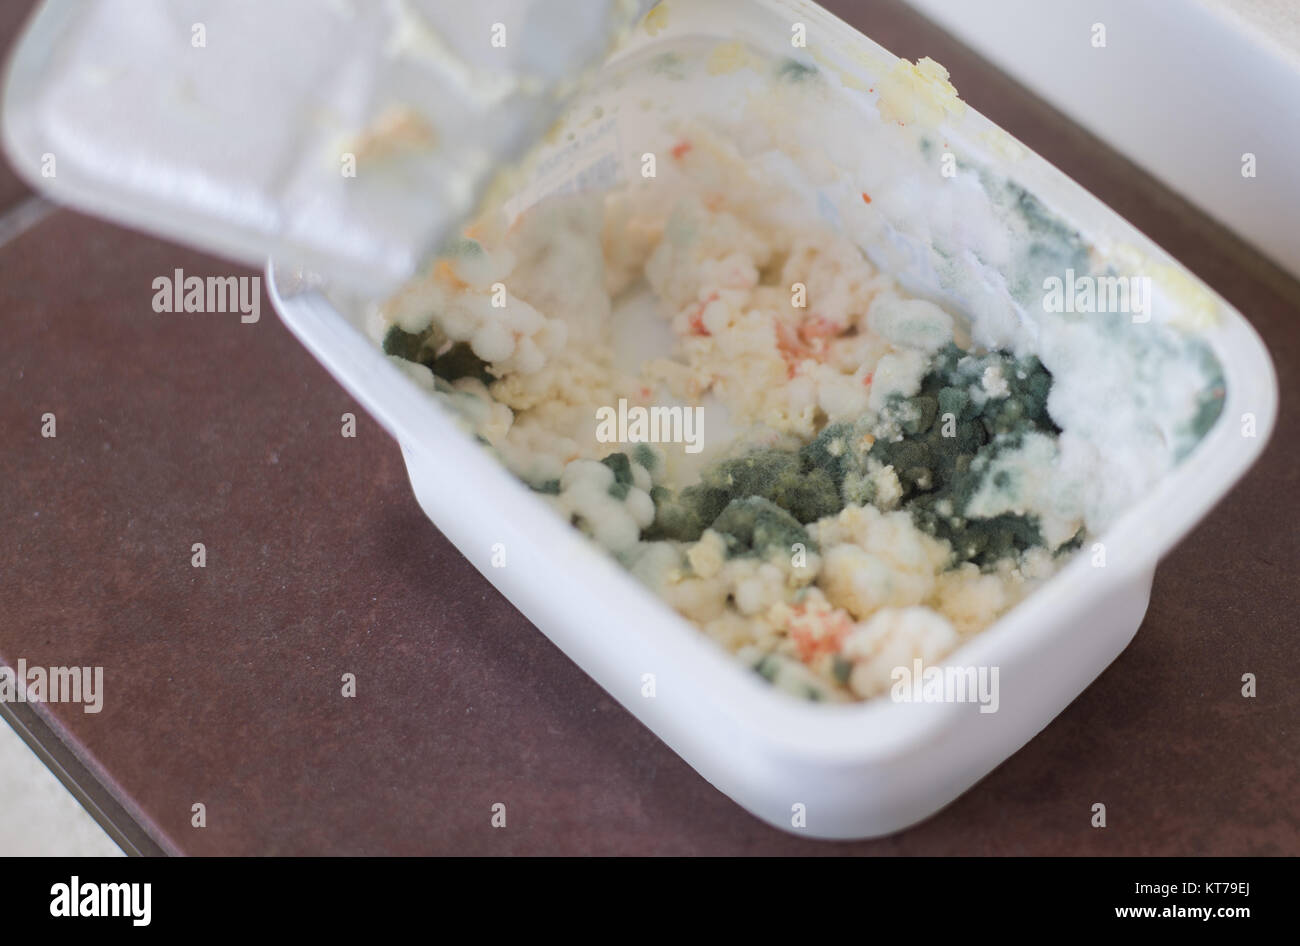 Close Up On Rotten Butter Or Cottage Cheese Stock Photo 169806186